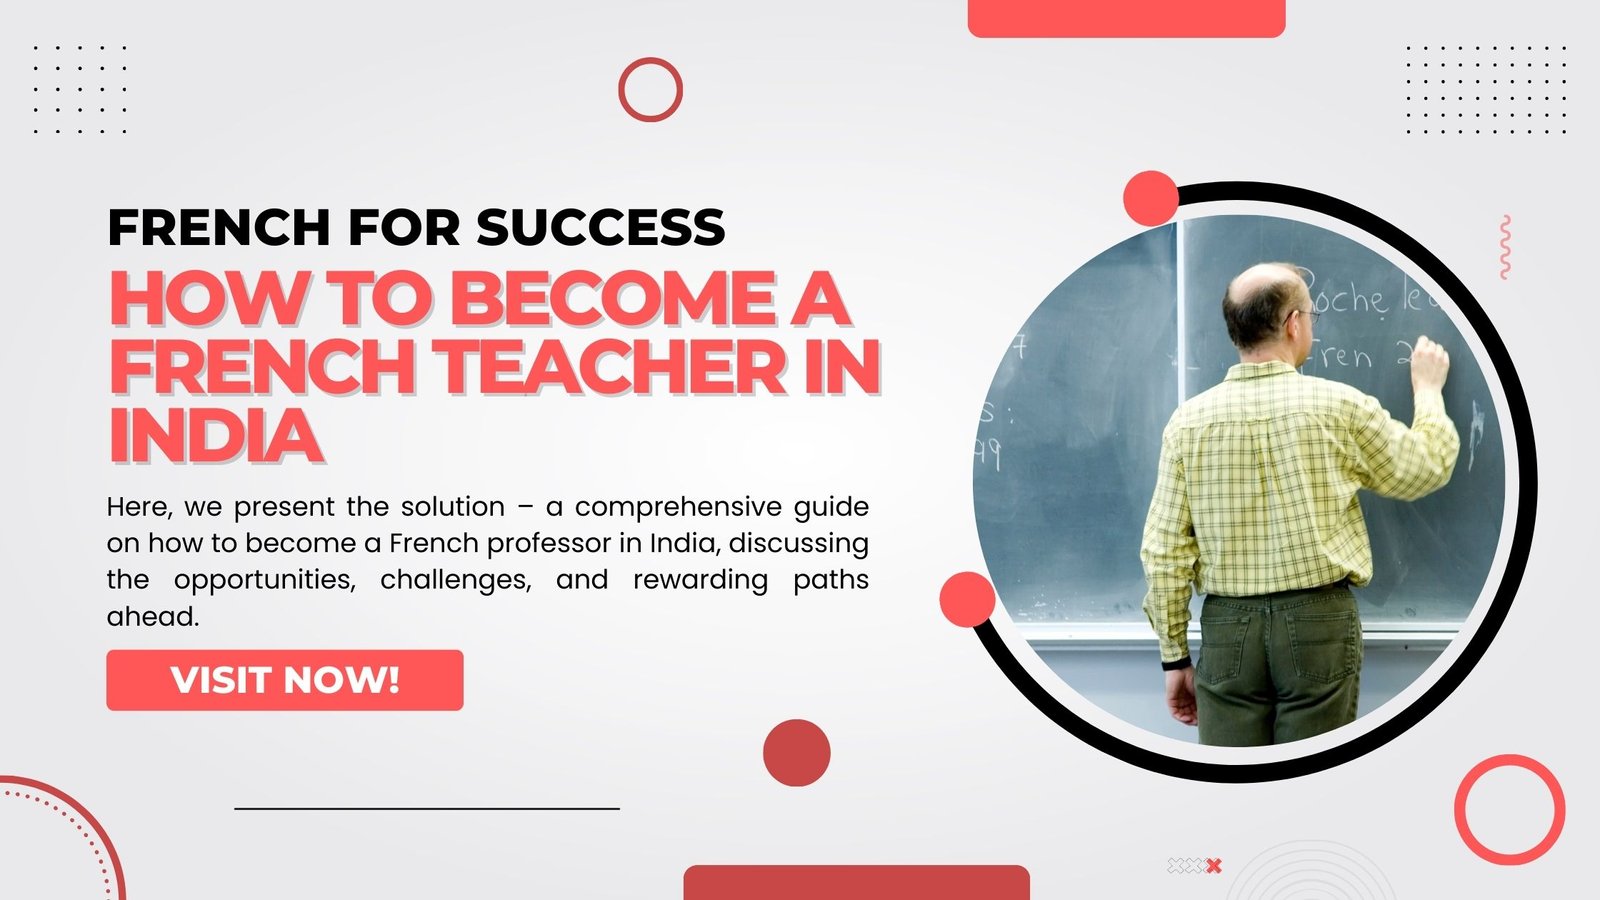 How to Become a French Teacher in India